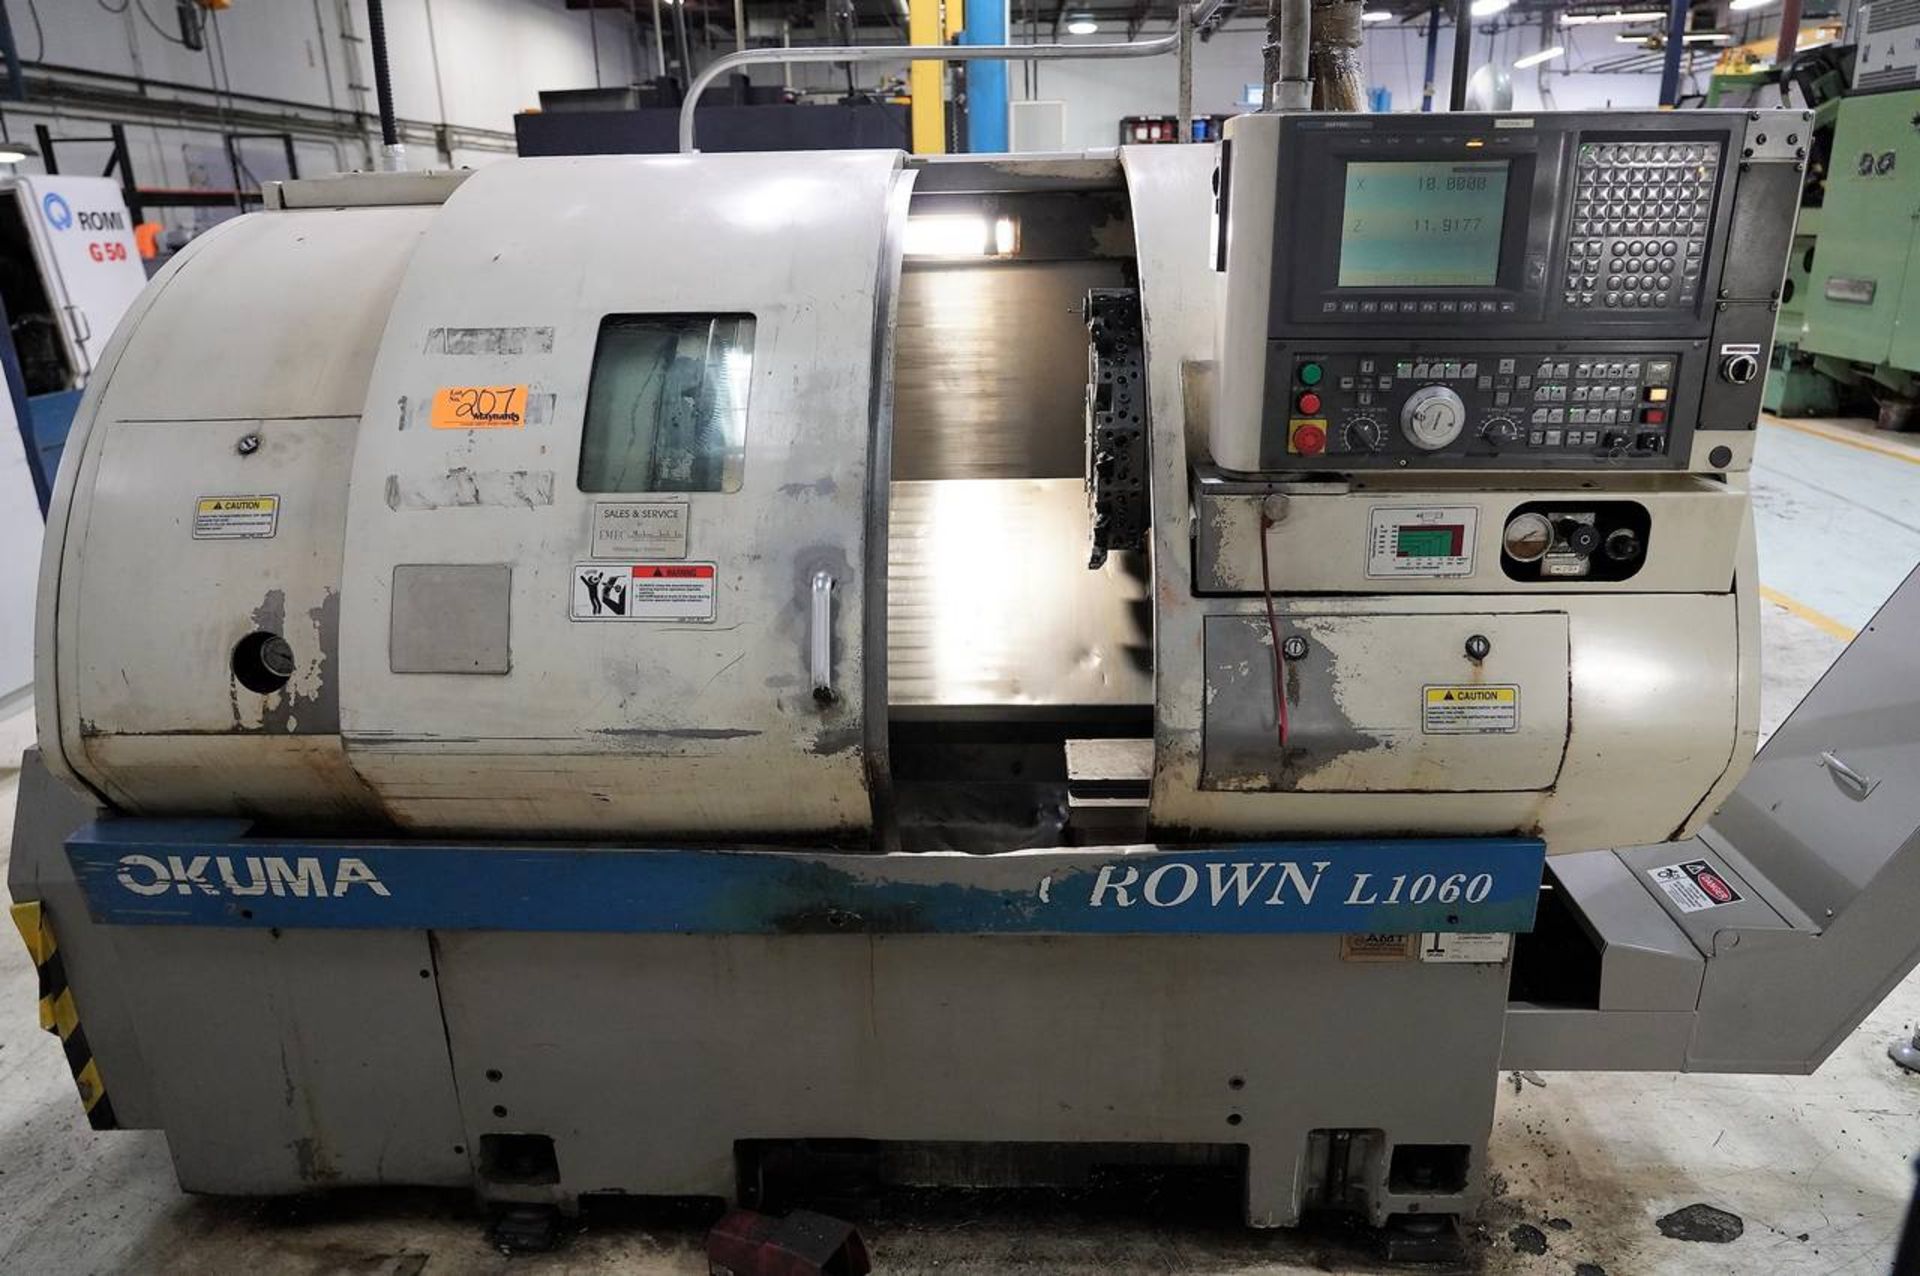 Okuma Crown L1060 CNC Turning Center Max. Swing Over Bed: 21.65", Max. Swing Over Cross Slide: 15.